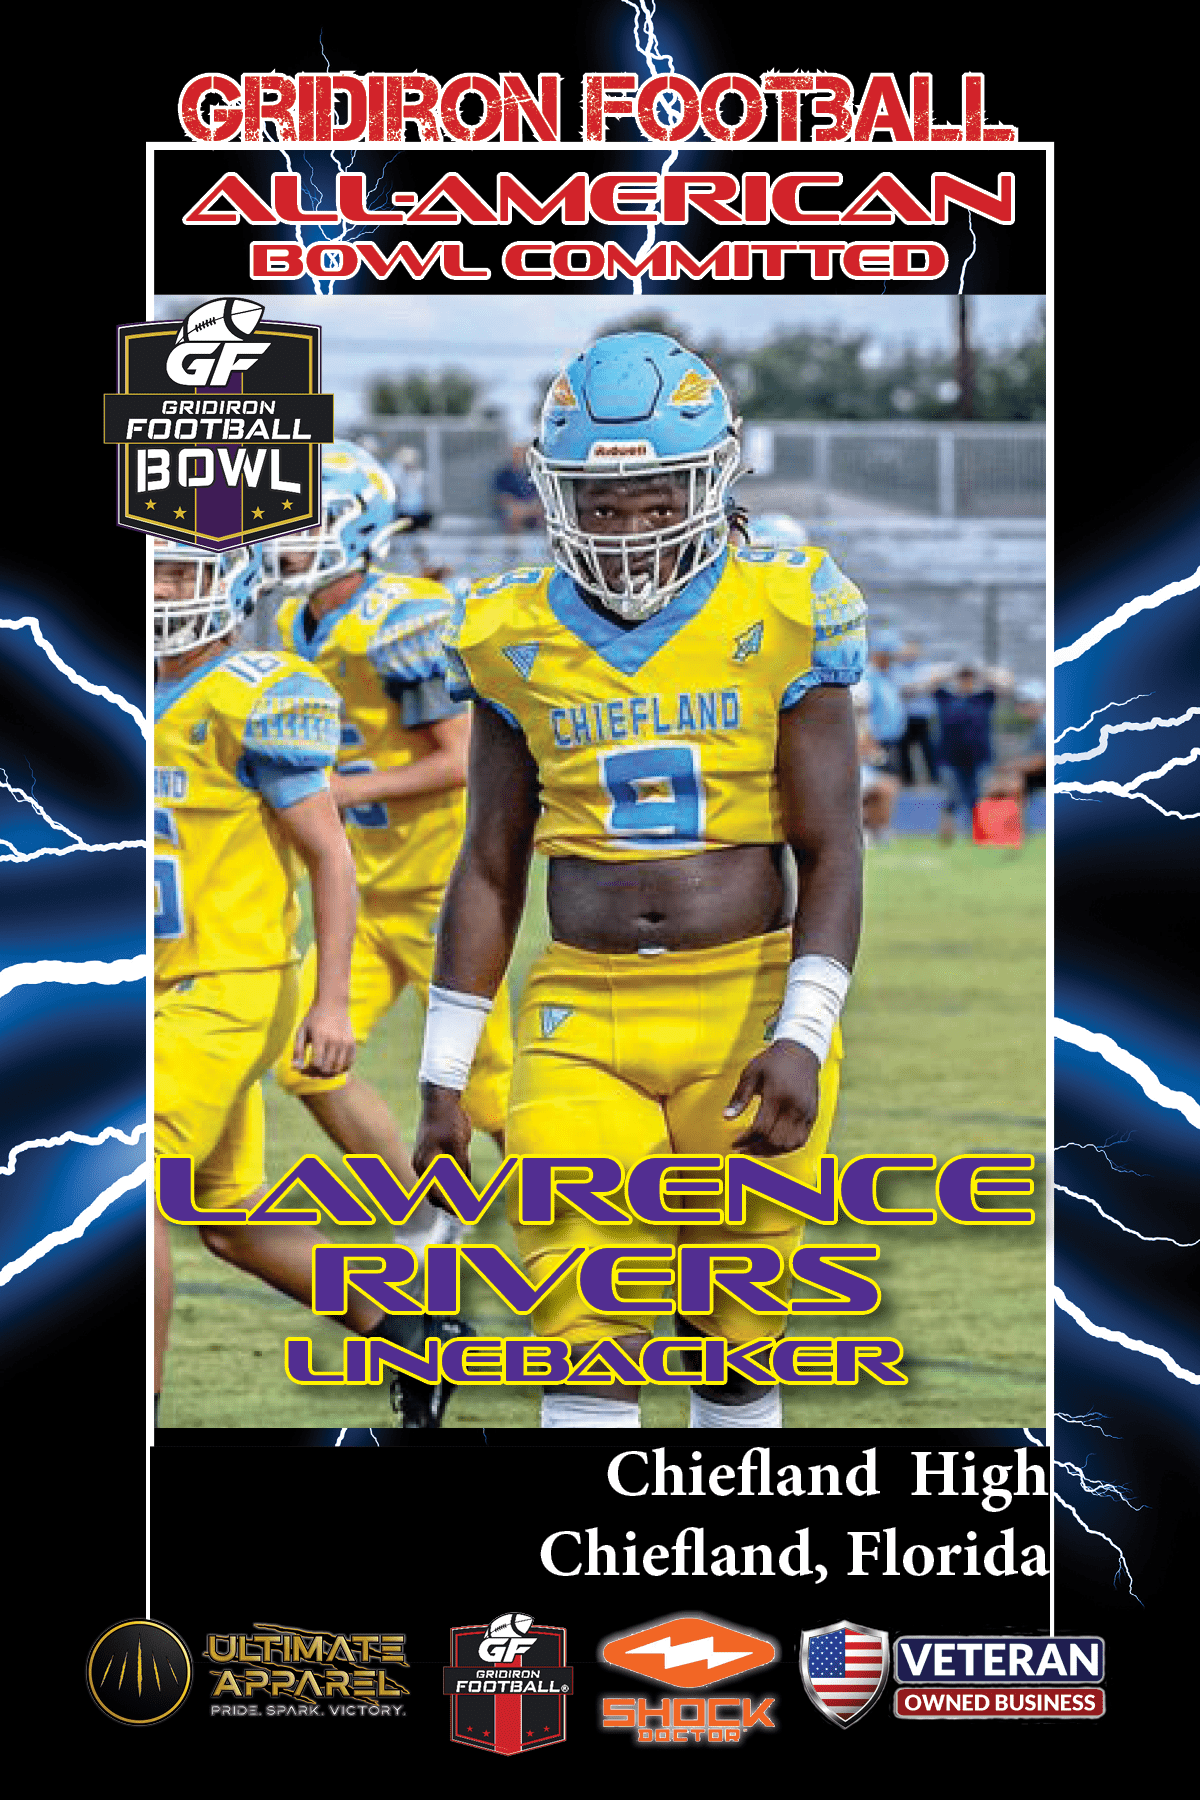 BREAKING NEWS: Chiefland High School (Chiefland, FL) LB Lawrence Rivers Commits To The Gridiron Football All-American Bowl Game